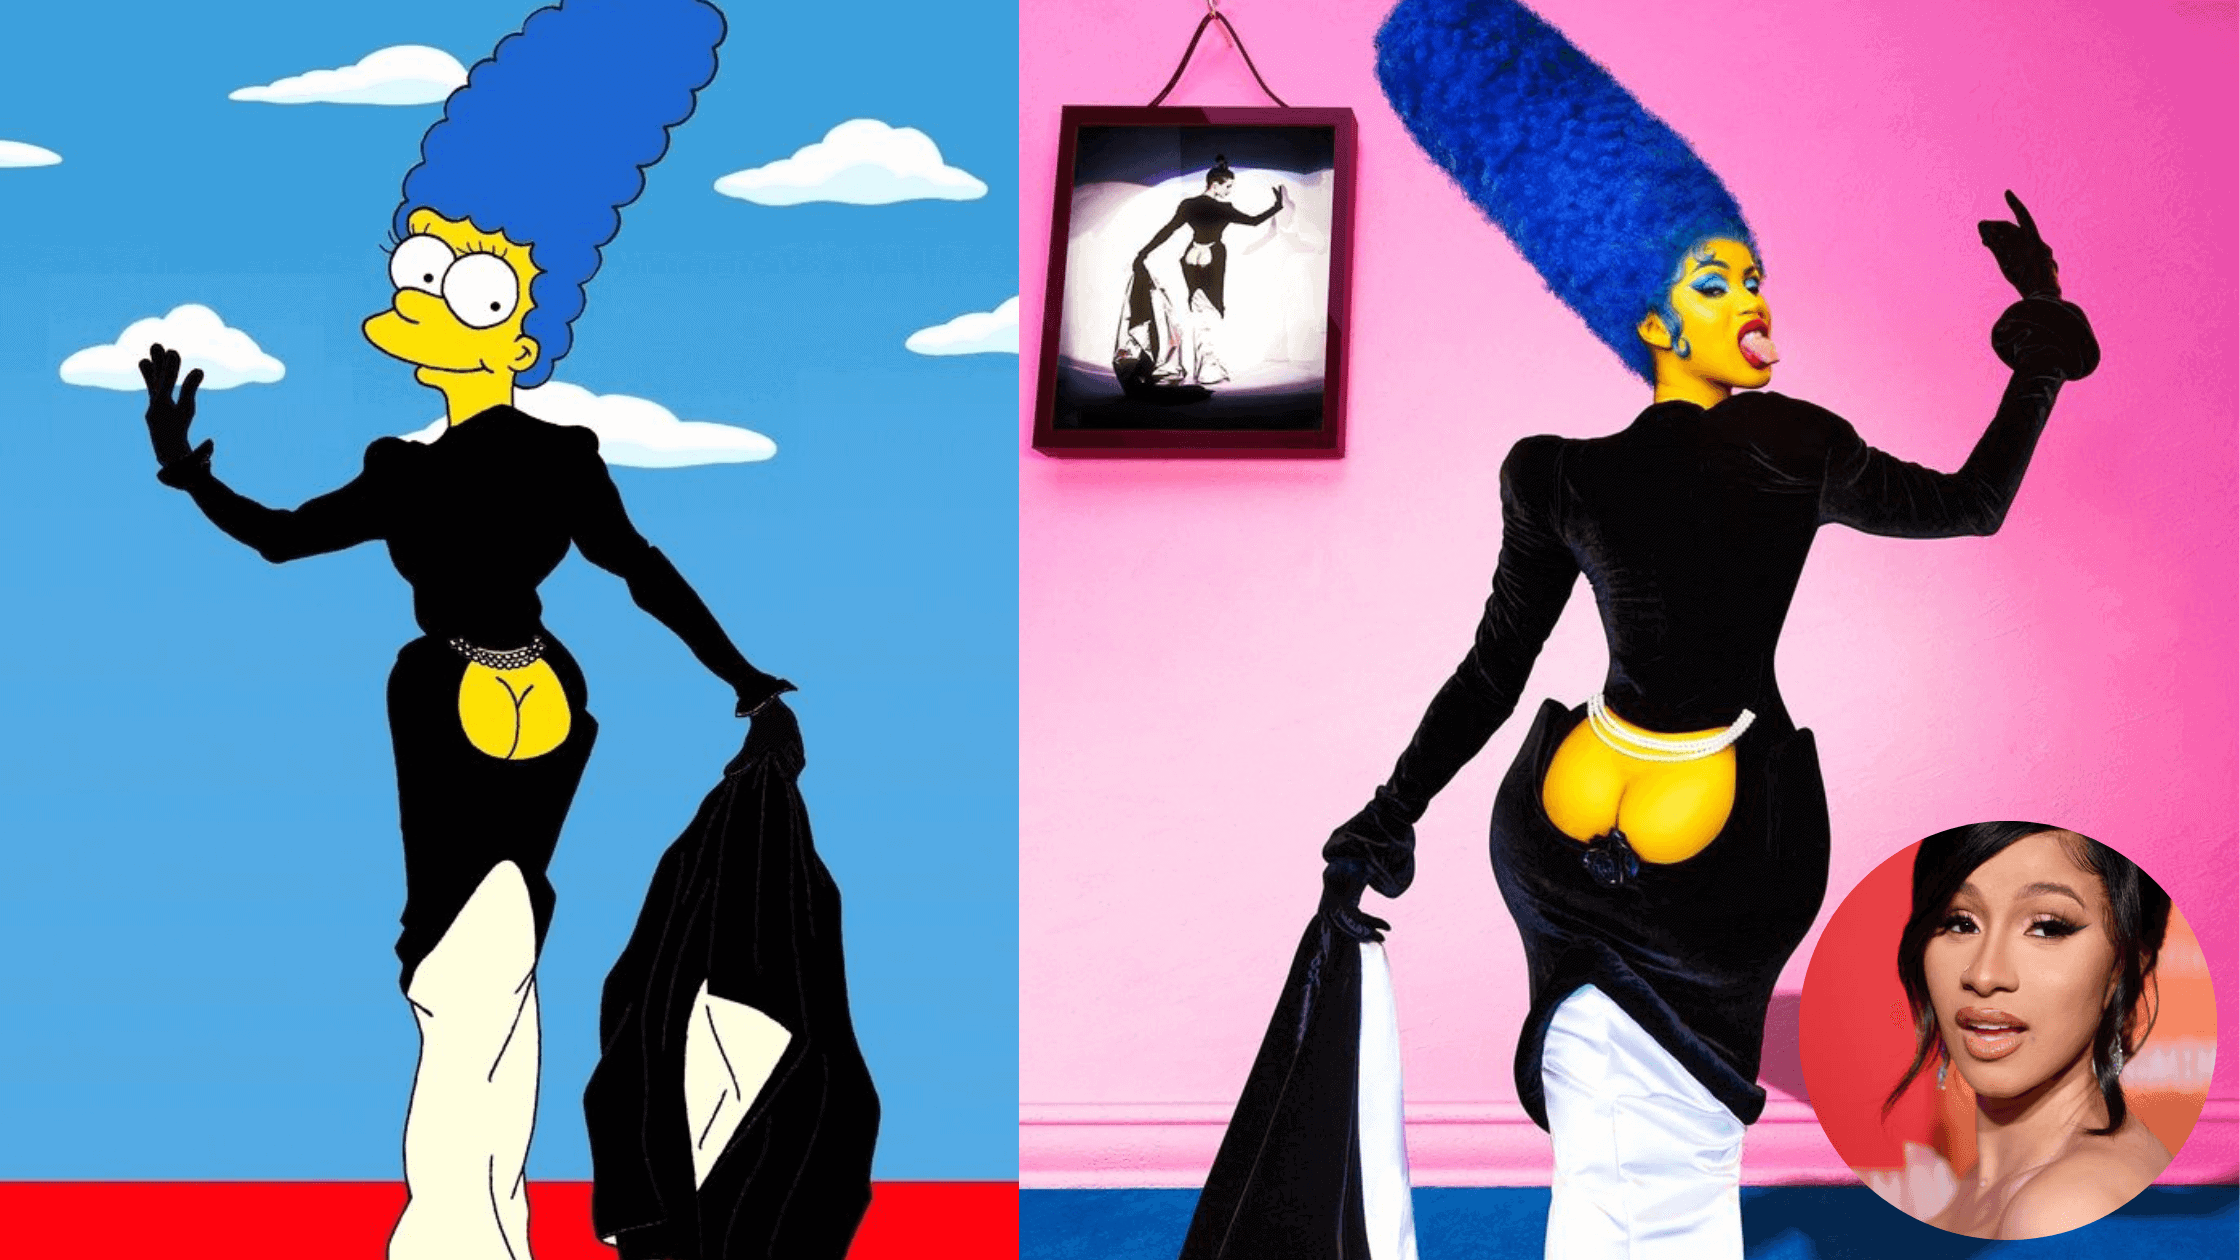 Cardi B Facing Legal Action Over Racy Marge Simpson's Halloween Costume